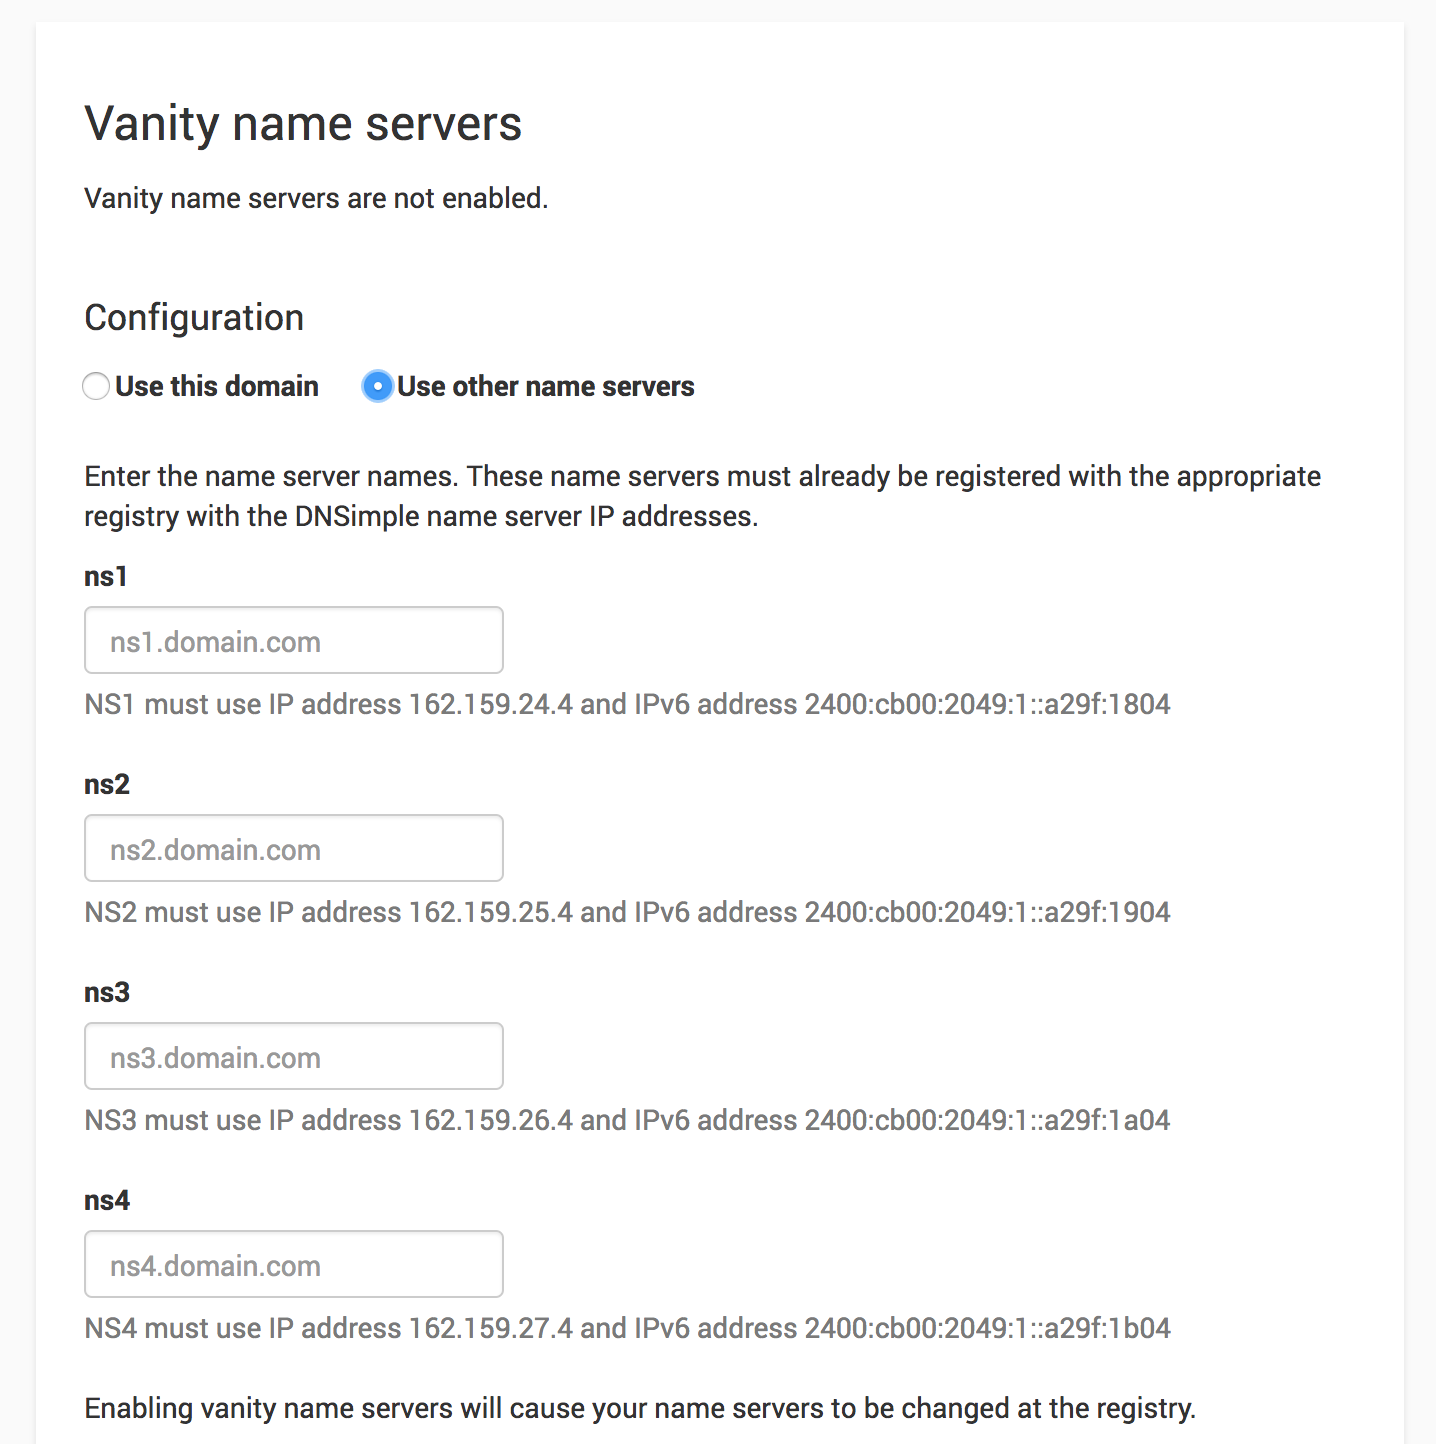 Vanity Name Servers with another domain